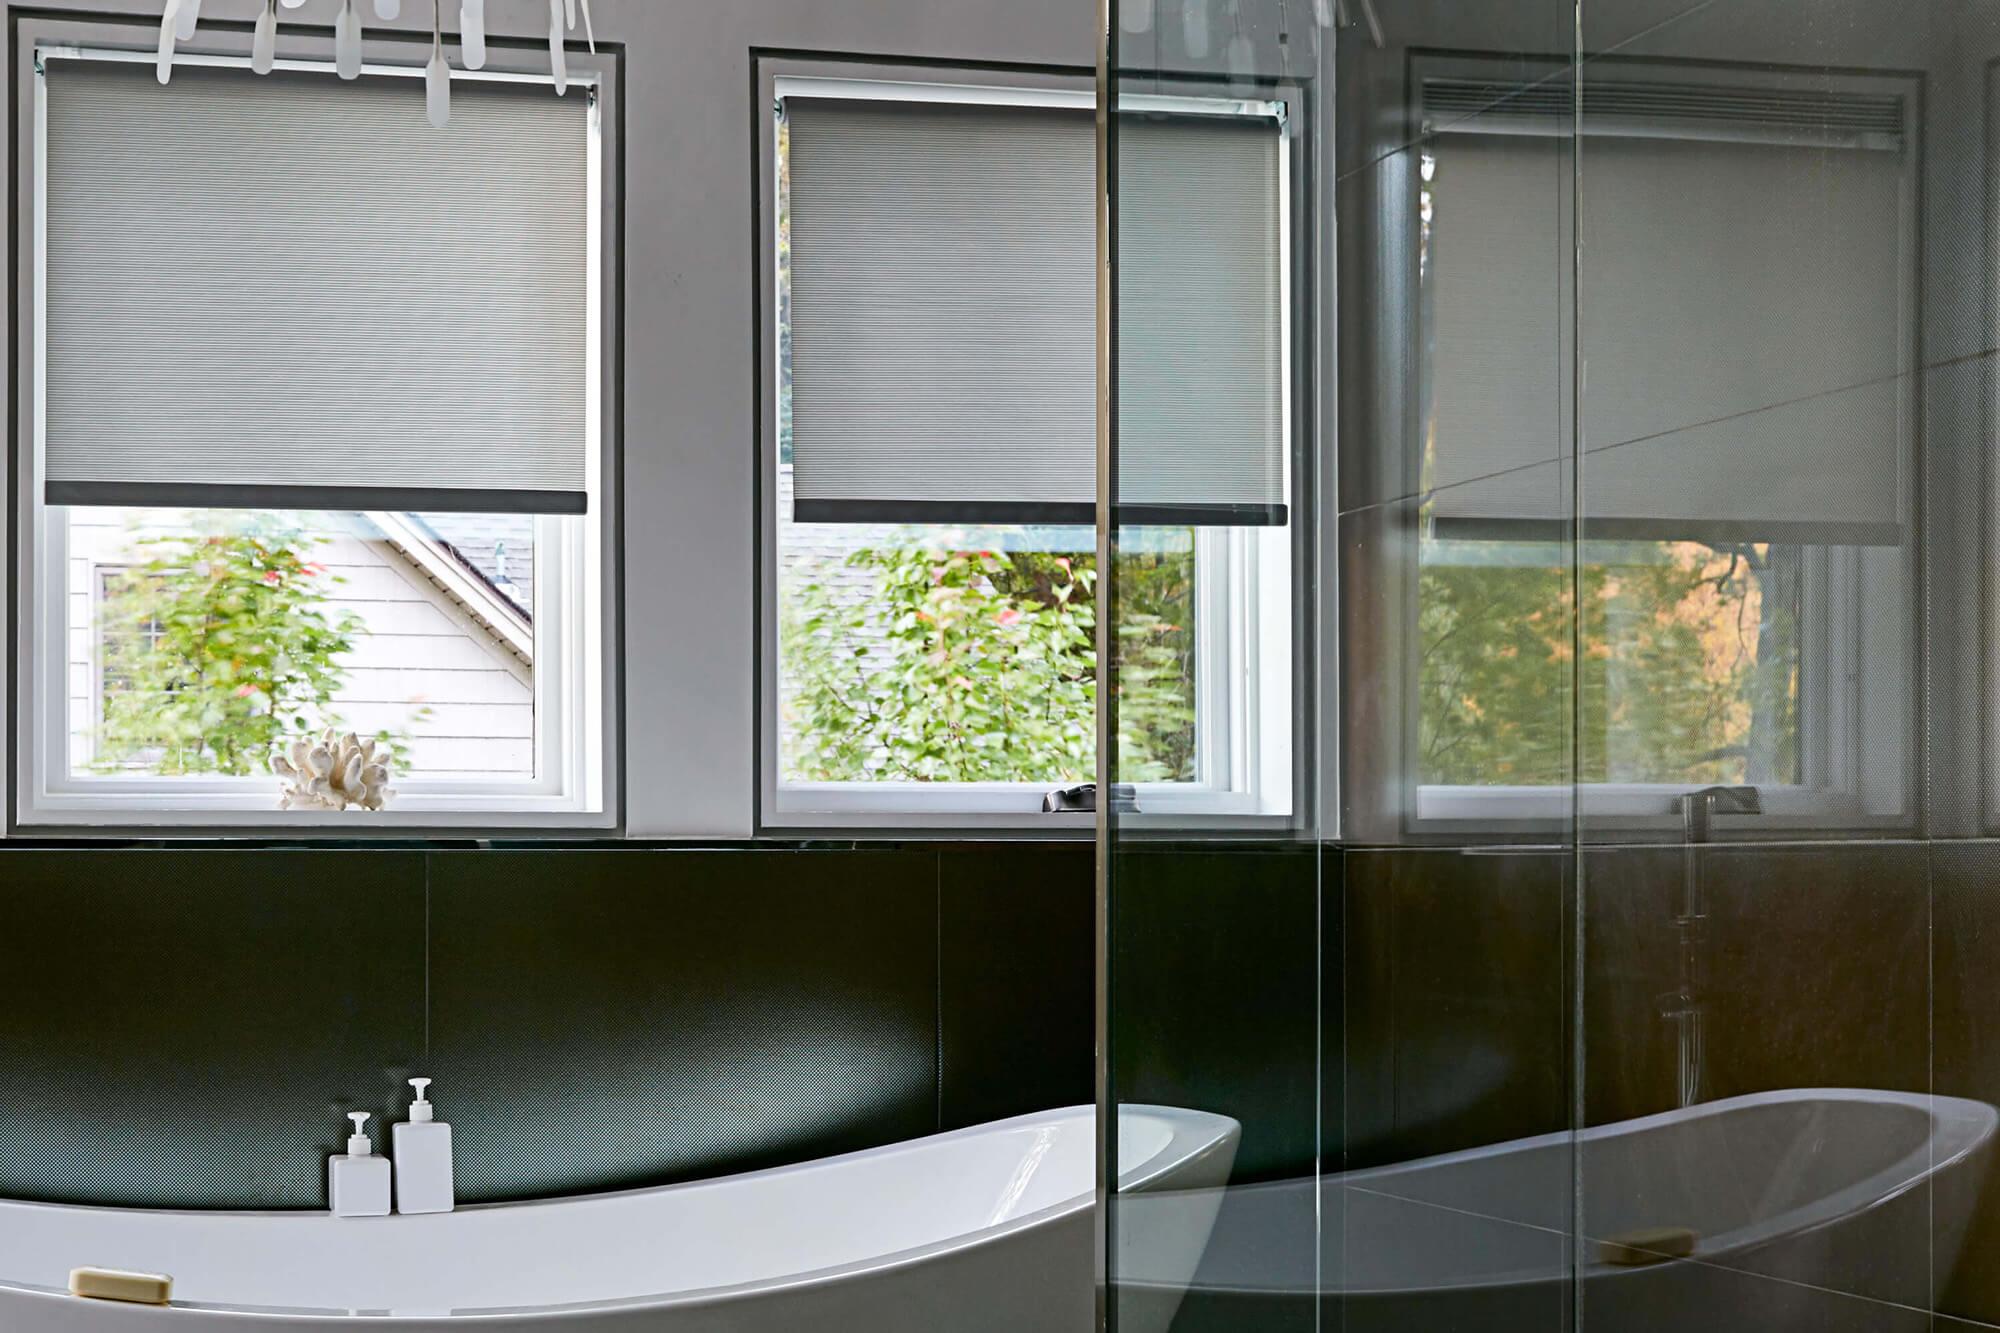 How do you install outdoor roller shades?